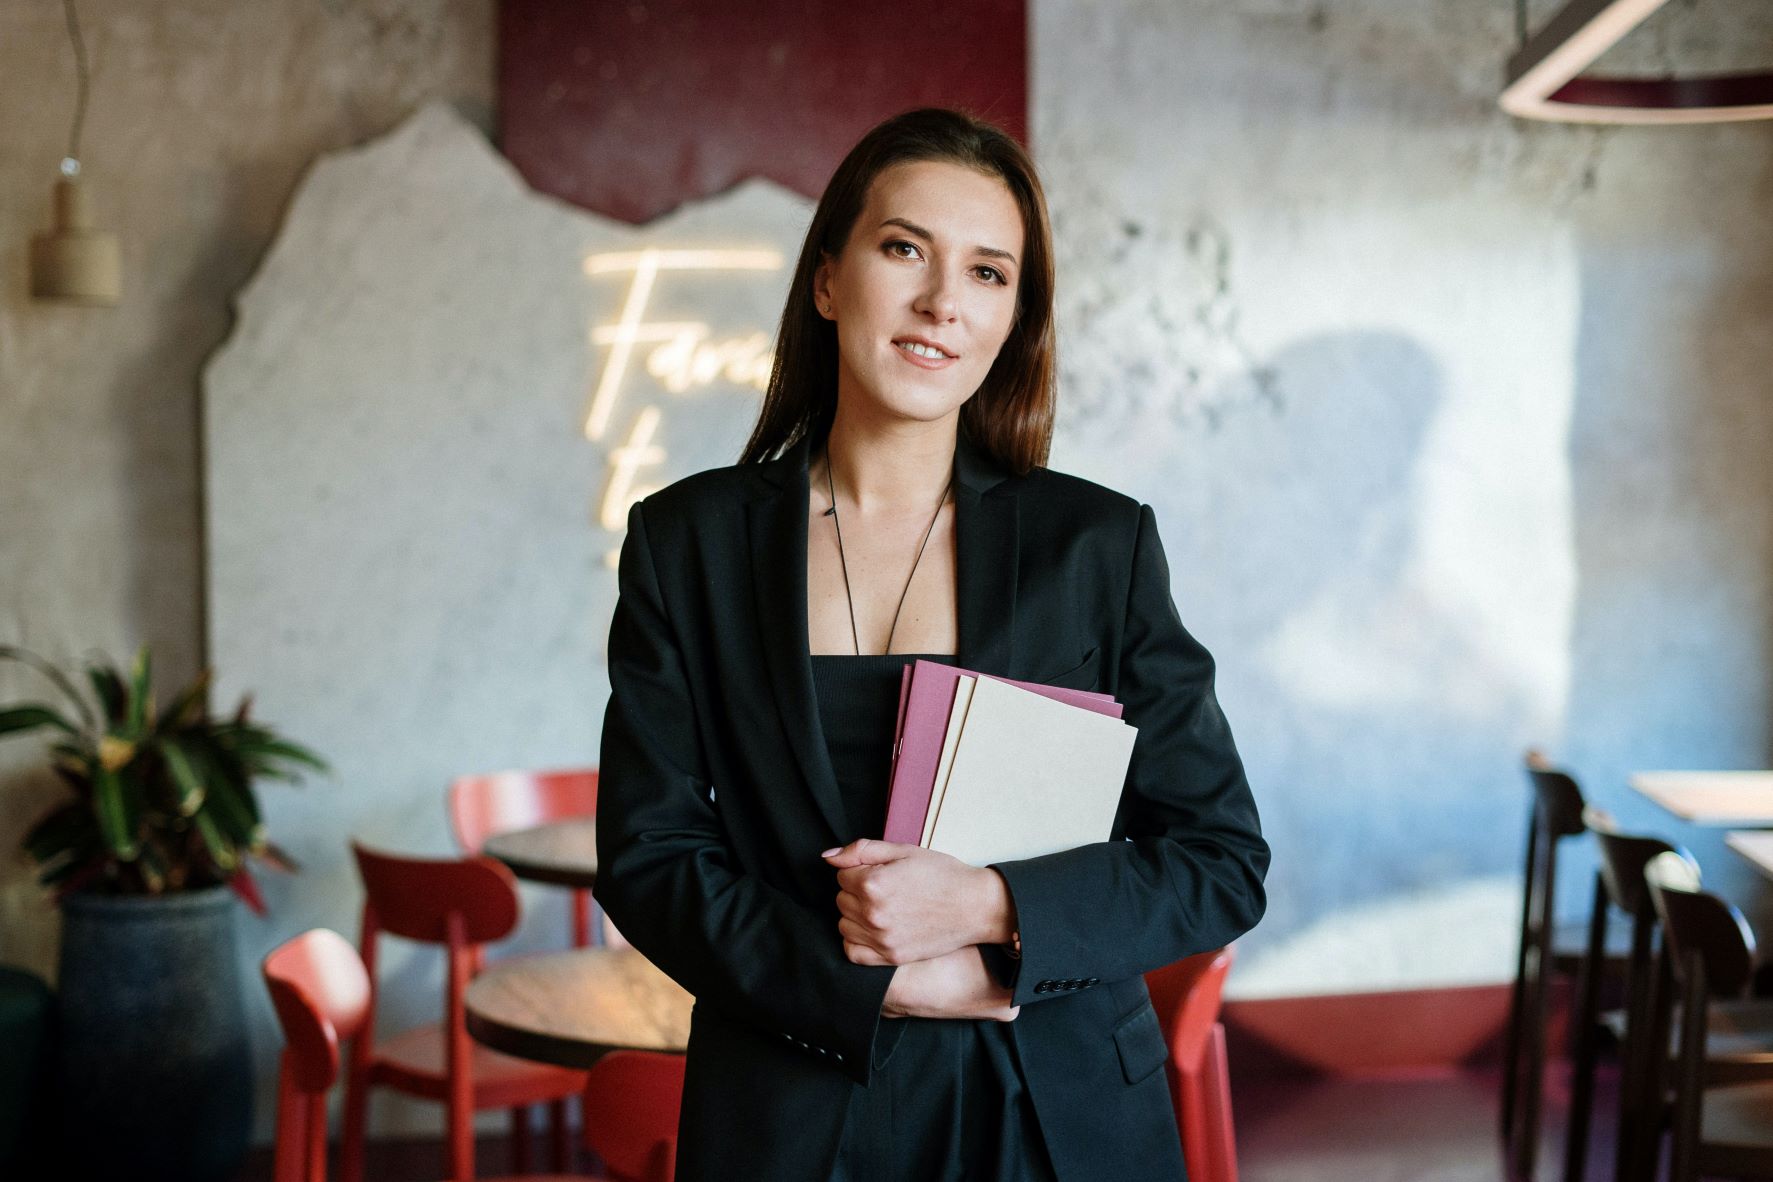  9 Hiring Strategies to Recruit and Keep the Best Hospitality Staff